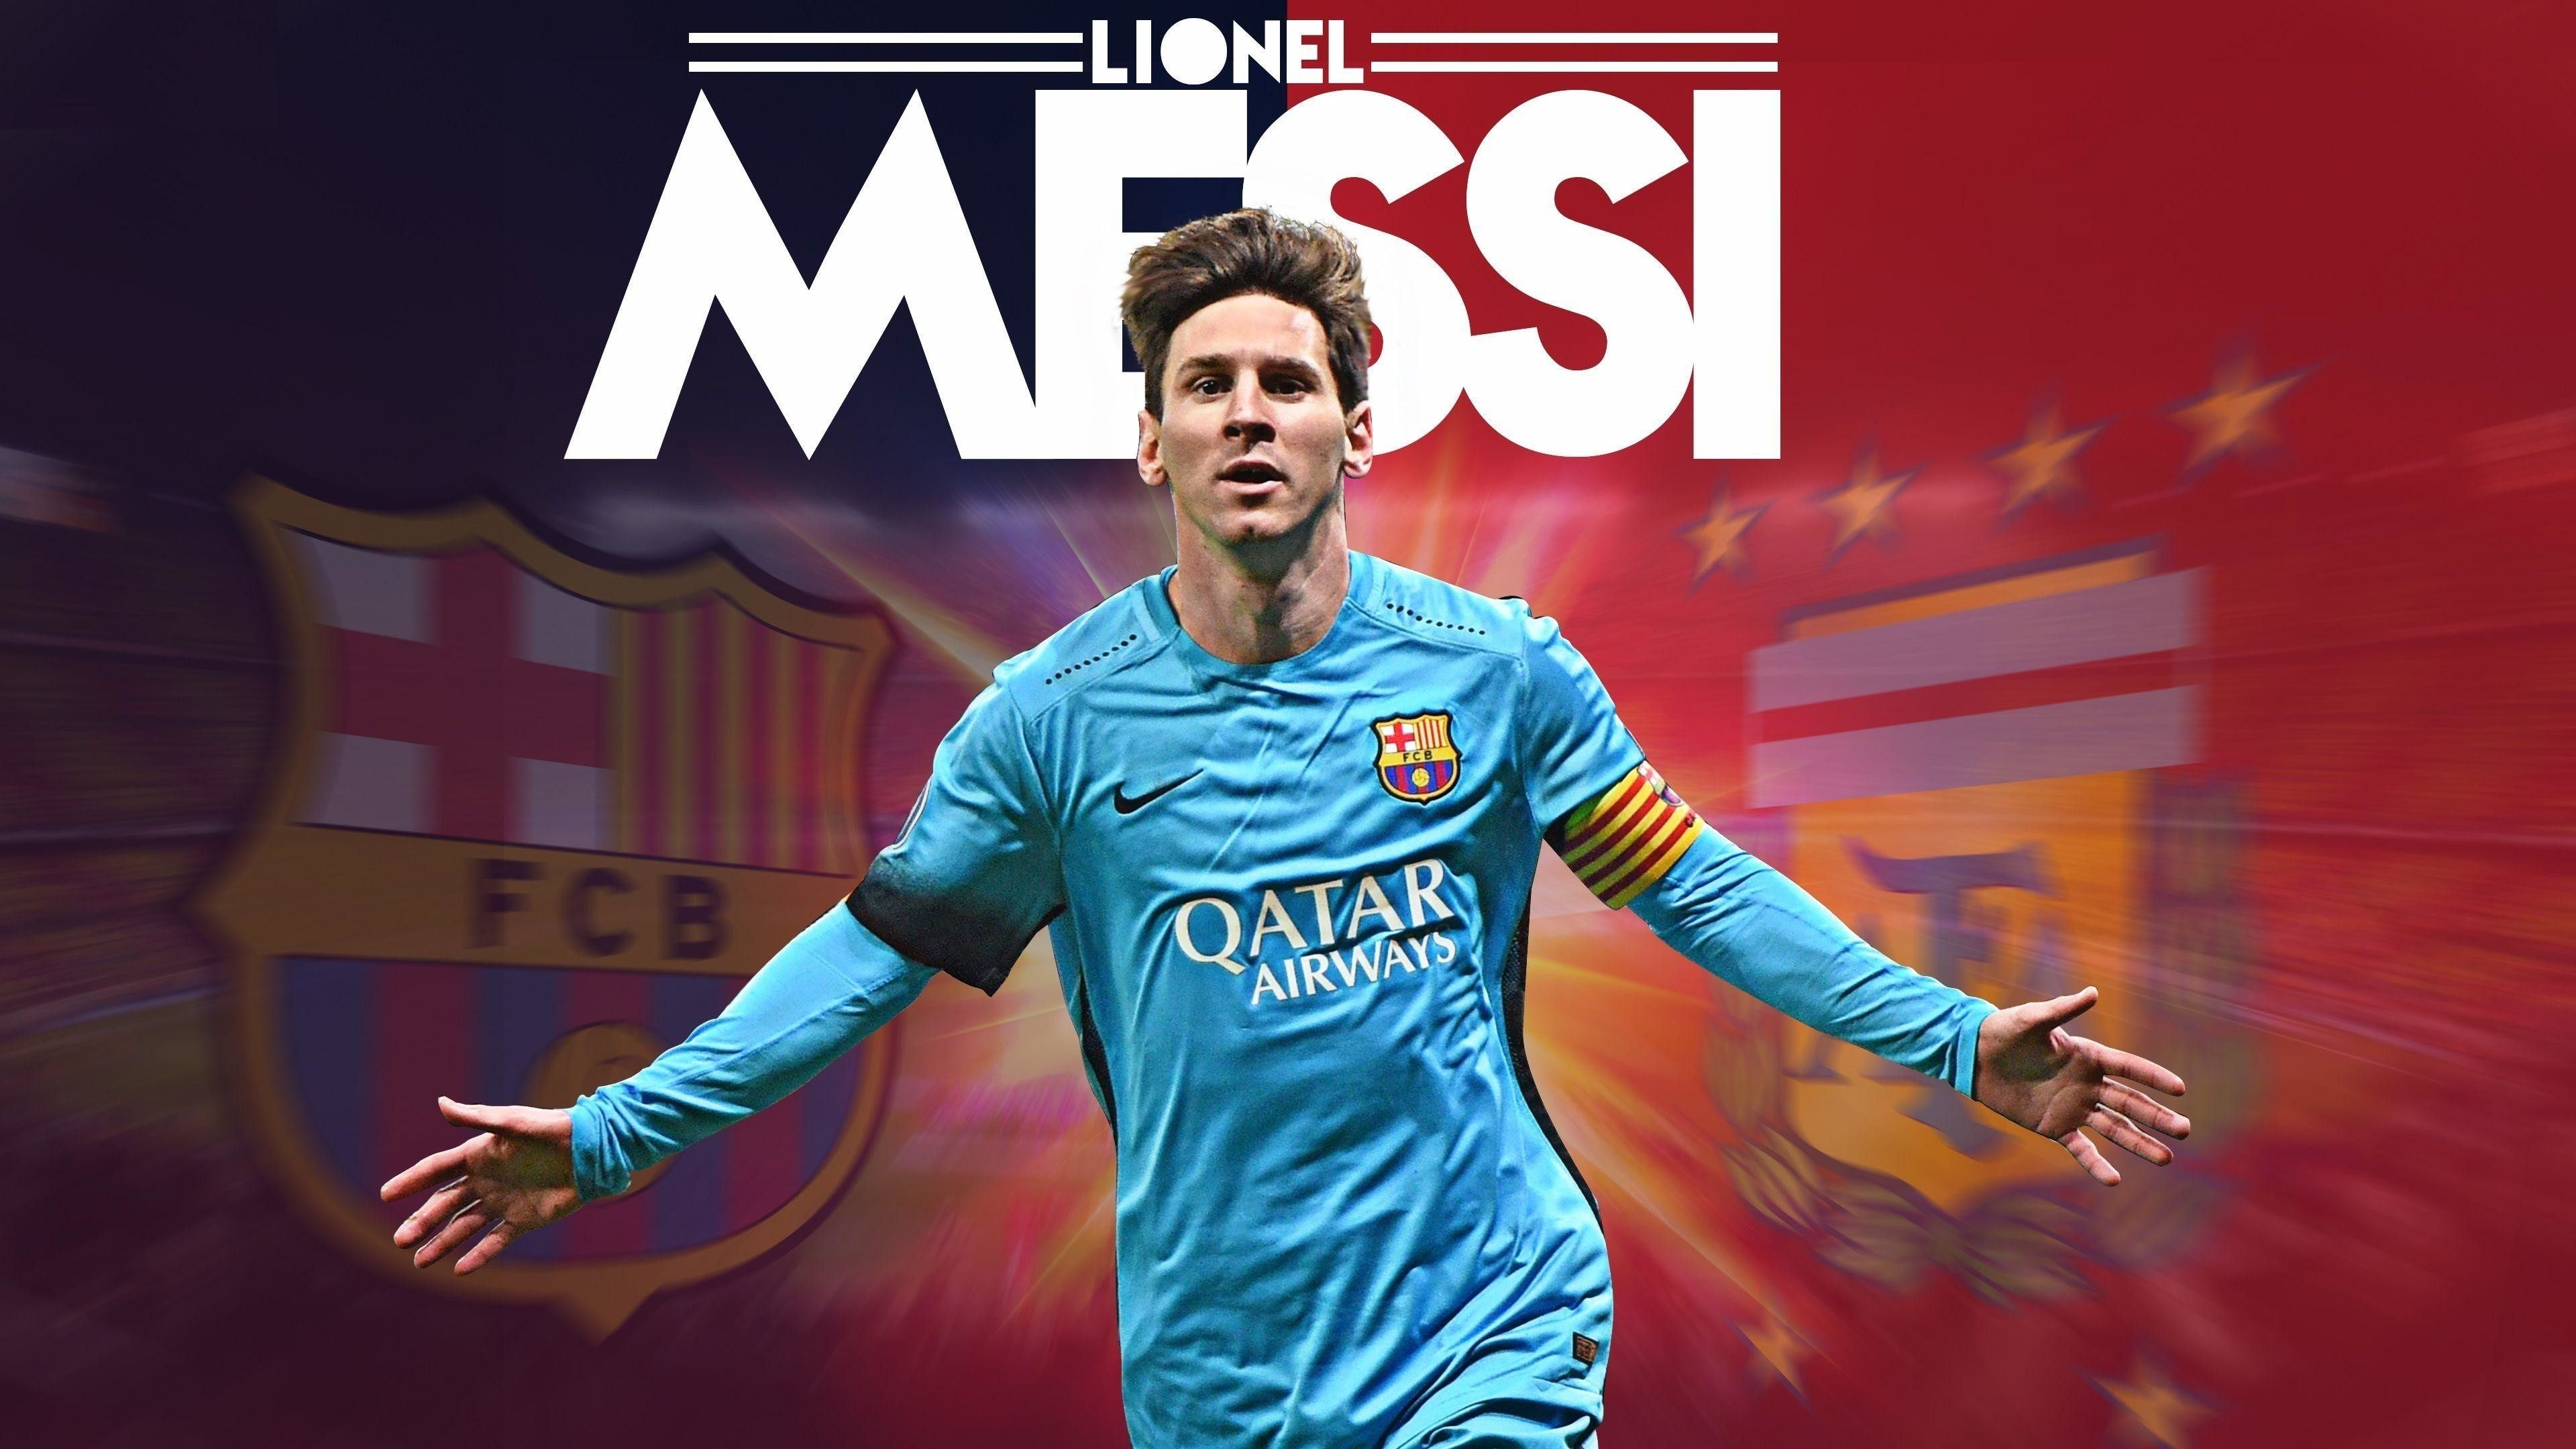 Download 3840x2160 wallpapers lionel messi, fcb, footballer, 4k, uhd 16:9, widescreen, 3840x2160 hd image, background, 1058